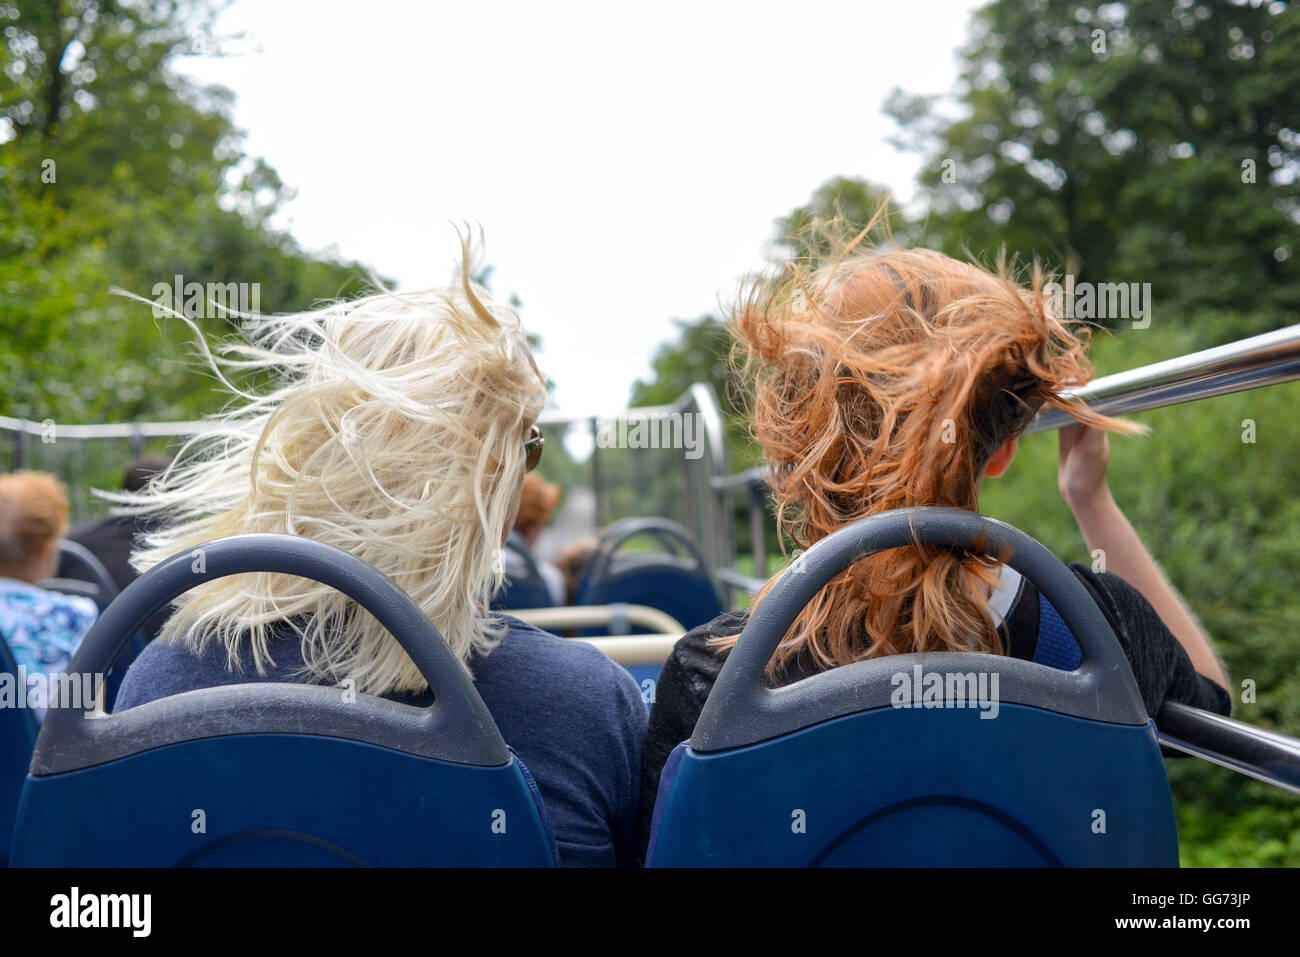 It's windy on the top deck of an open top bus when it's moving as these two women passengers are finding out. Stock Photo